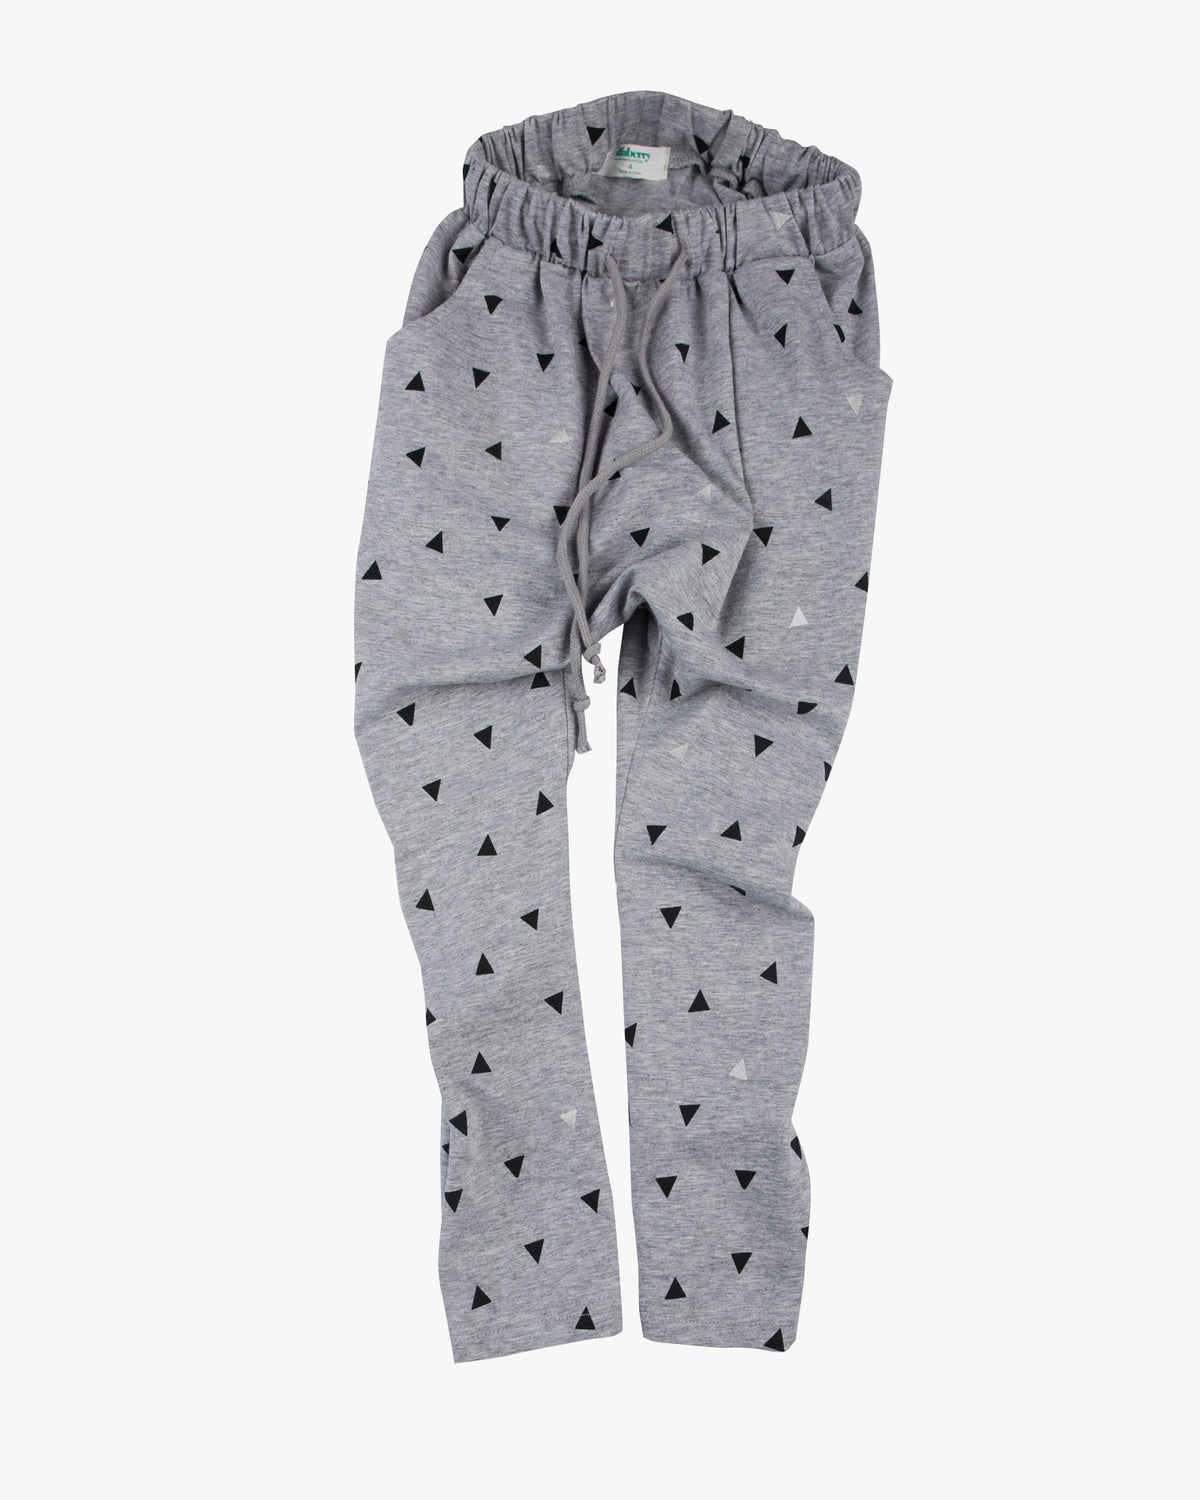 Slouch Pant in Triangle Print grey front